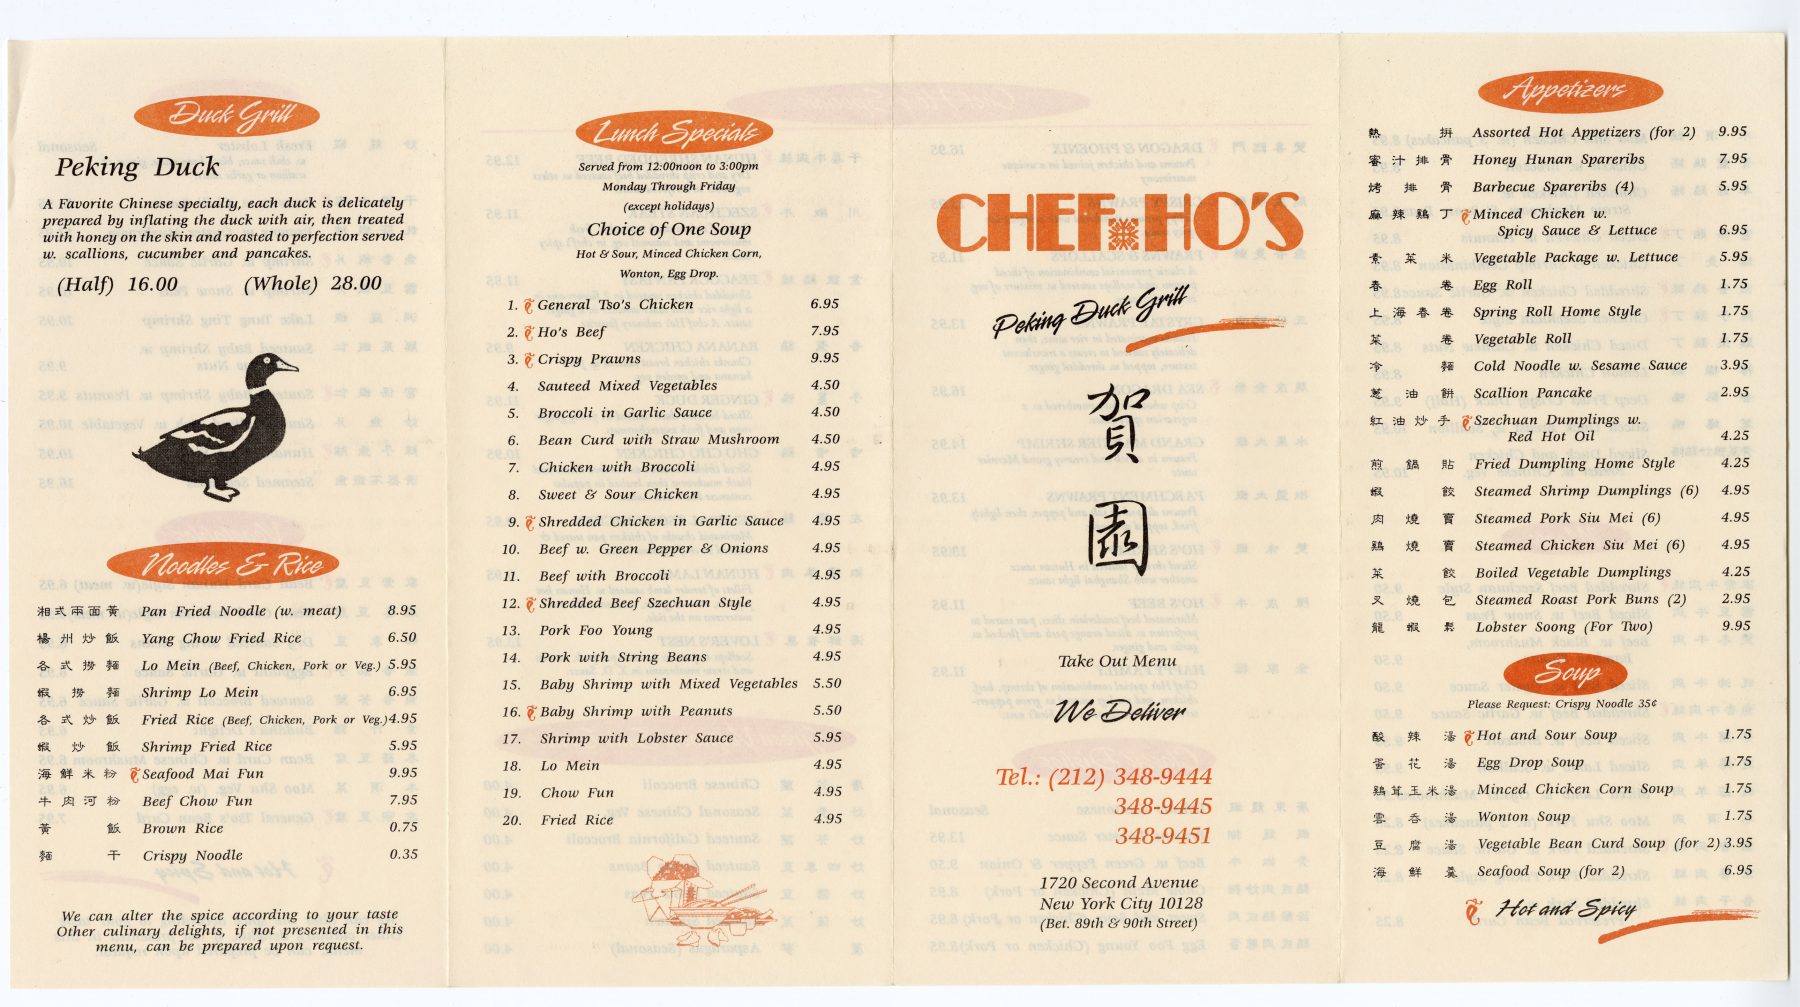 1980s-1990s menus collection Harley Spiller Collection University of Toronto Scarborough Library – Museum of Chinese America